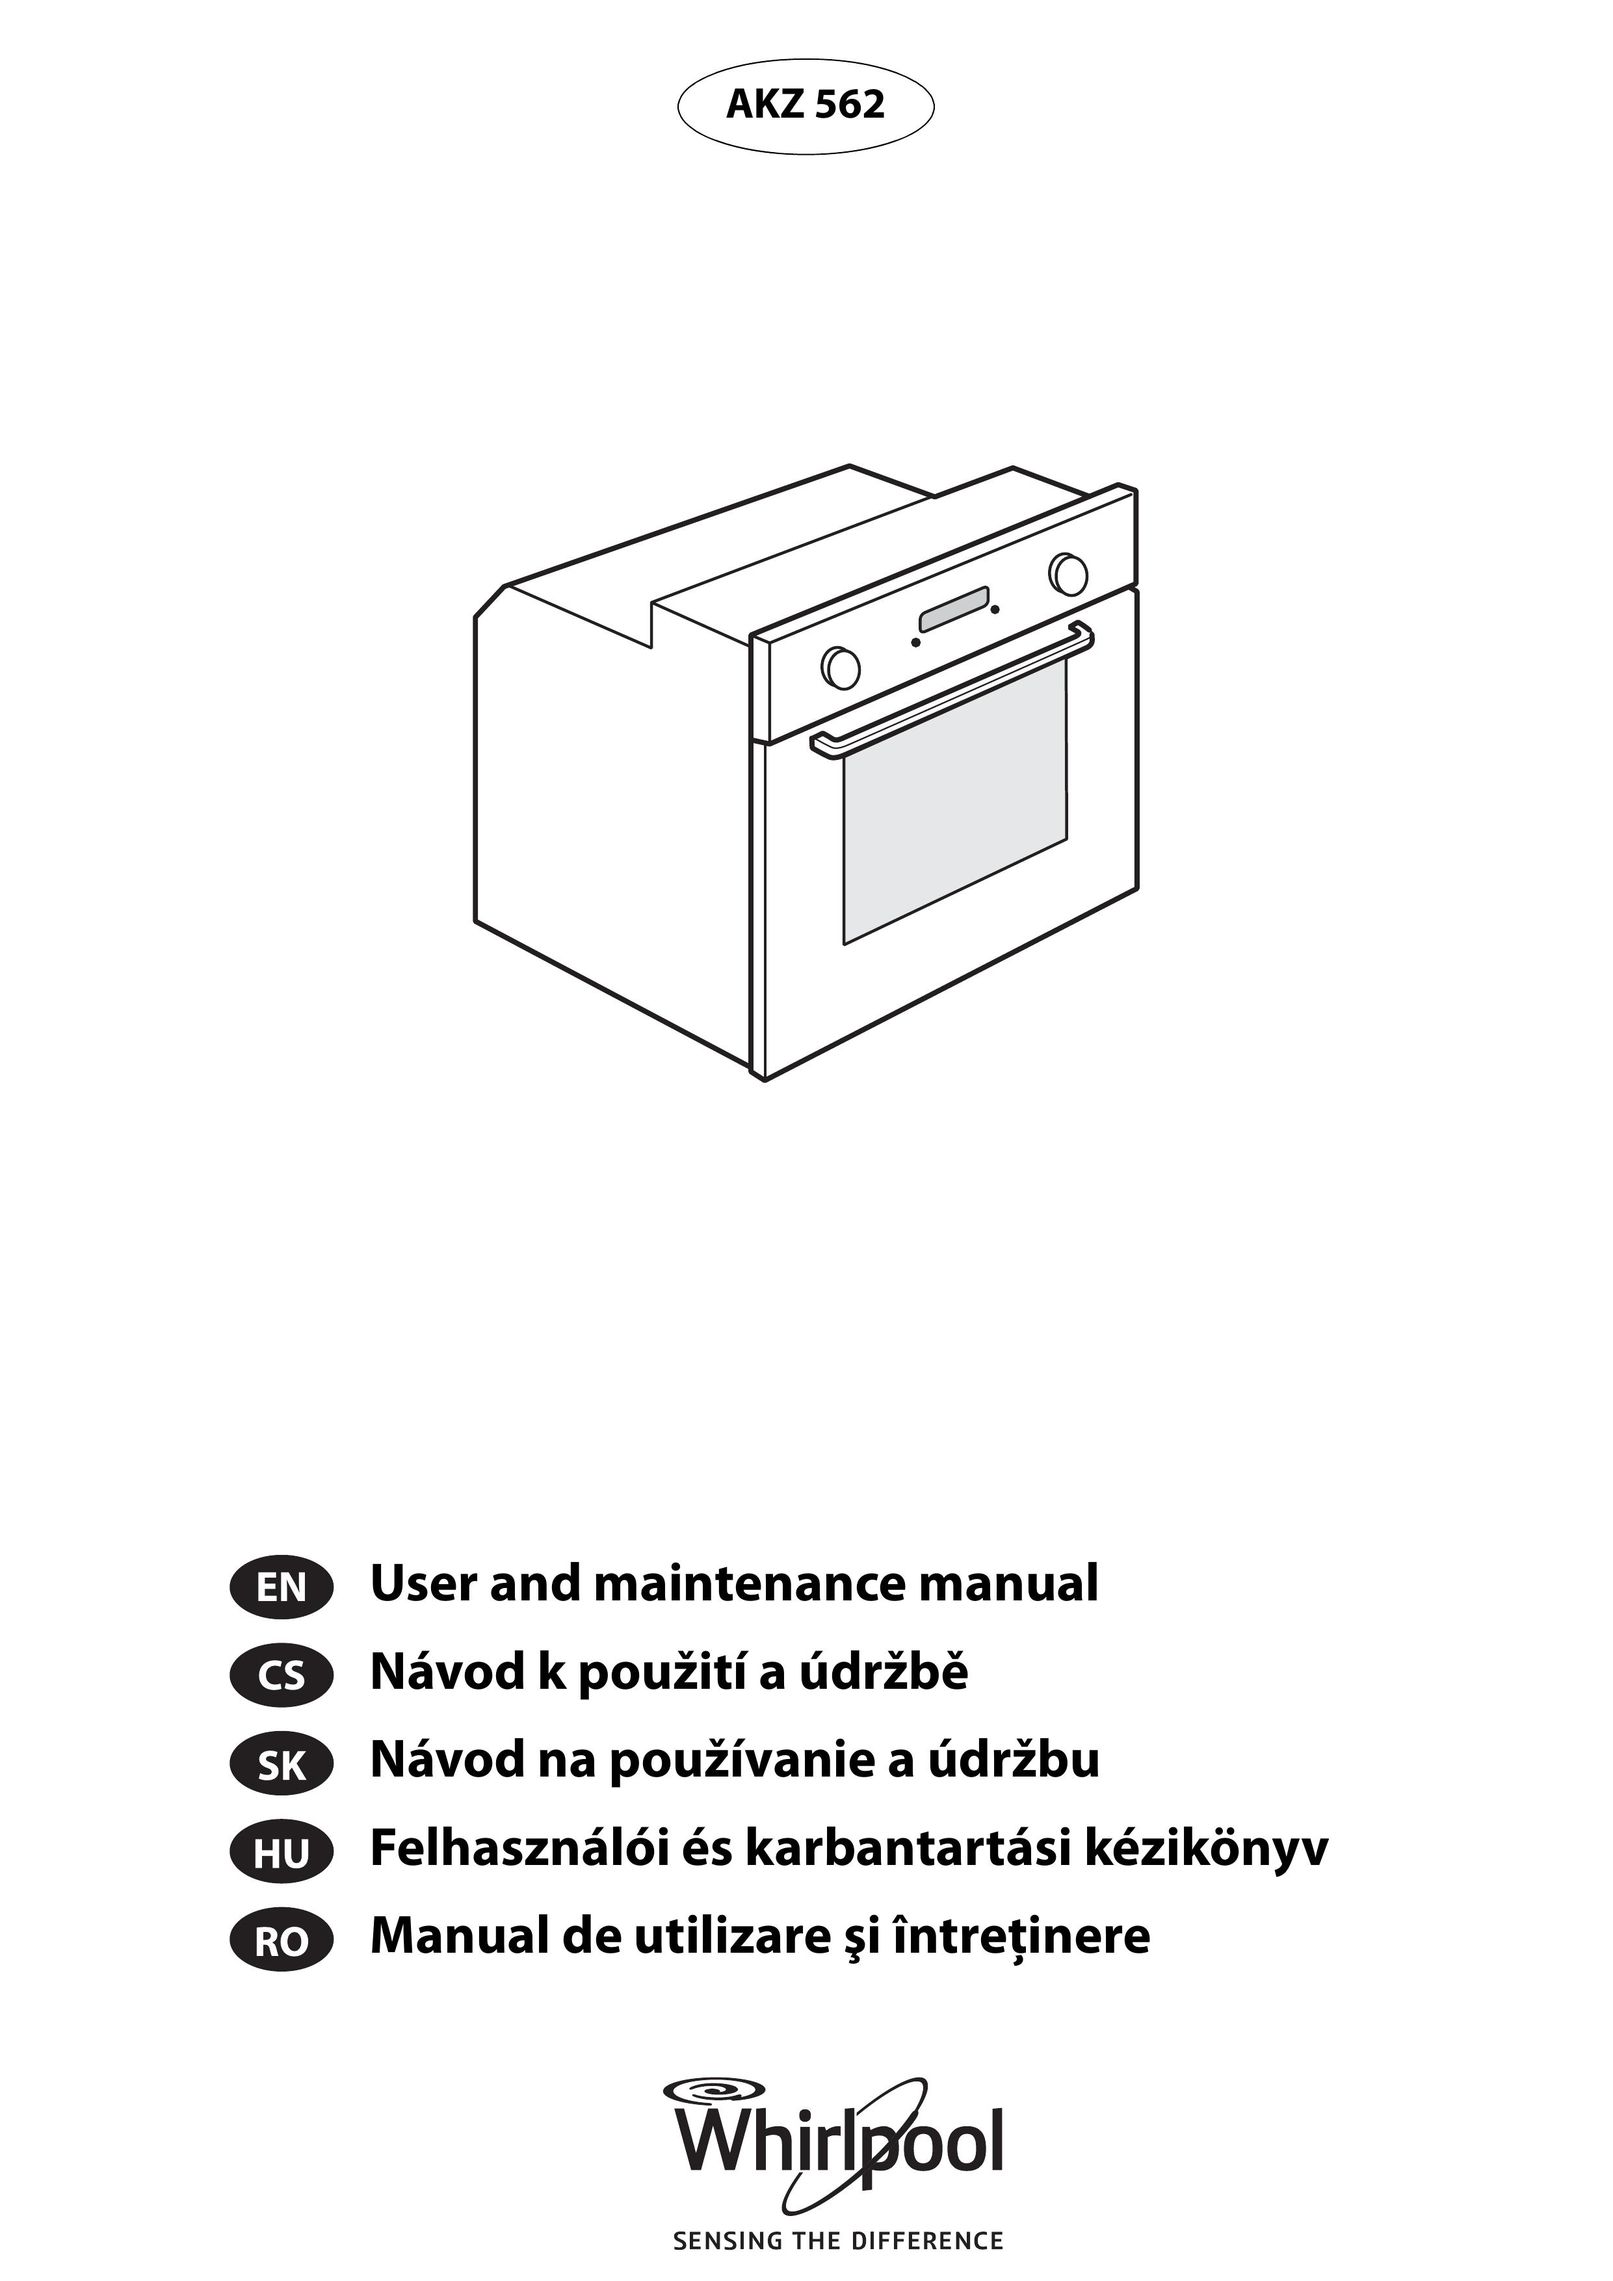 Whirlpool AKZ 562 Microwave Oven User Manual